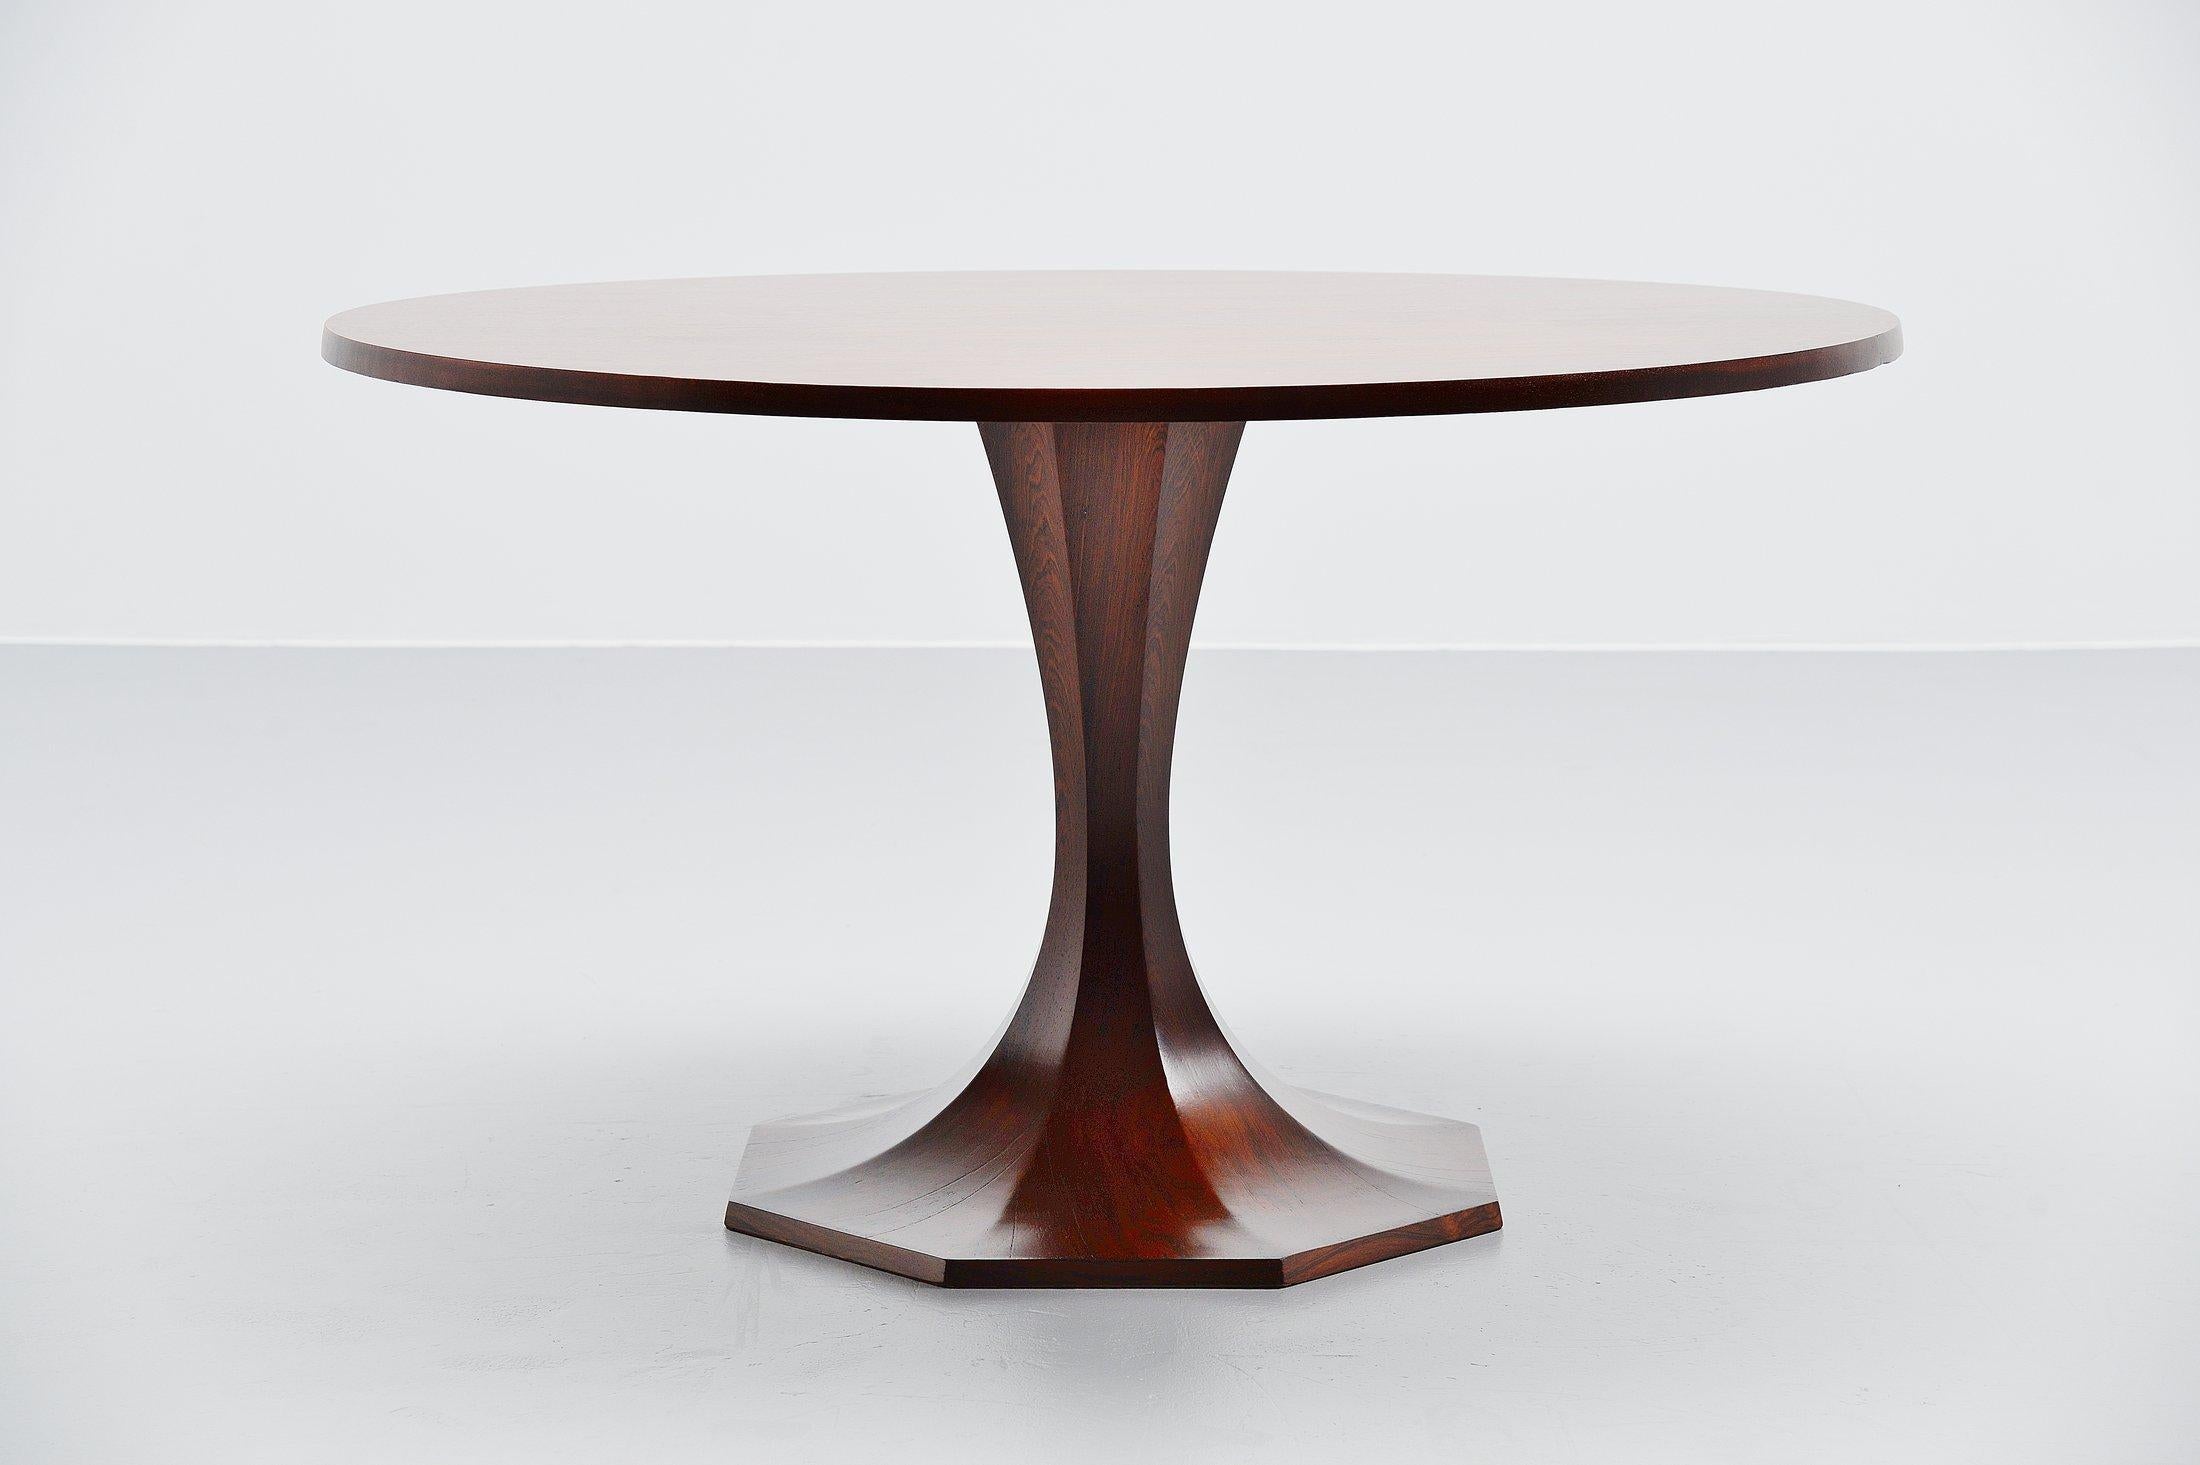 Stunning early pedestal 'Clessidra' dining table designed by Carlo de Carli and manufactured by Mobilia, Italy 1950. Very nice rosewood grained dining table with octagonal shaped tulip base. The table is super nicely balanced especially with the